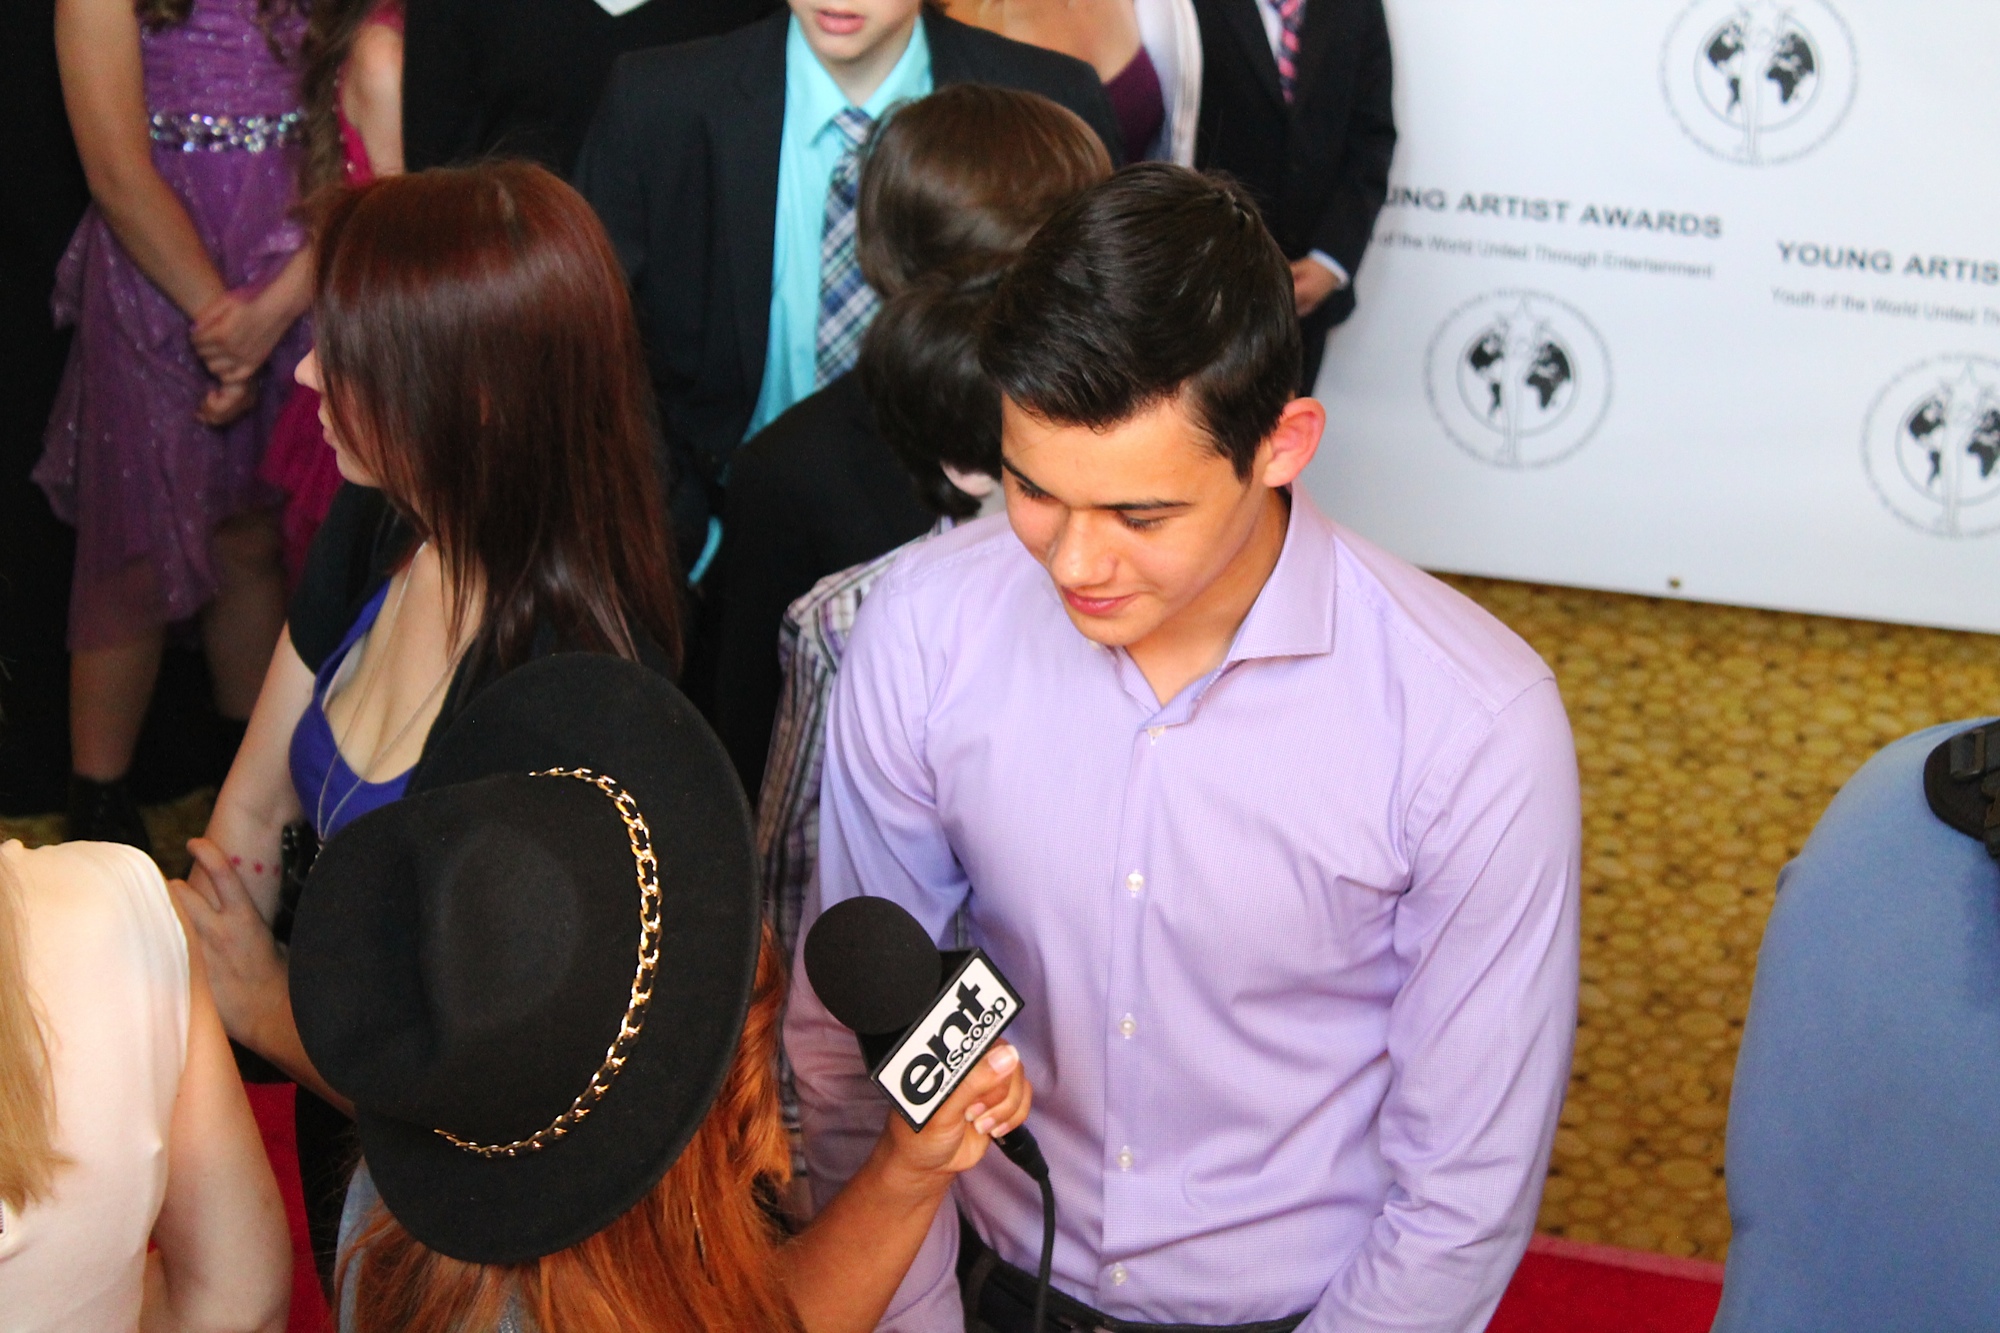 Peter Bundic interviewed by ENT Scoop at the 2015 Young Artist Awards in LA